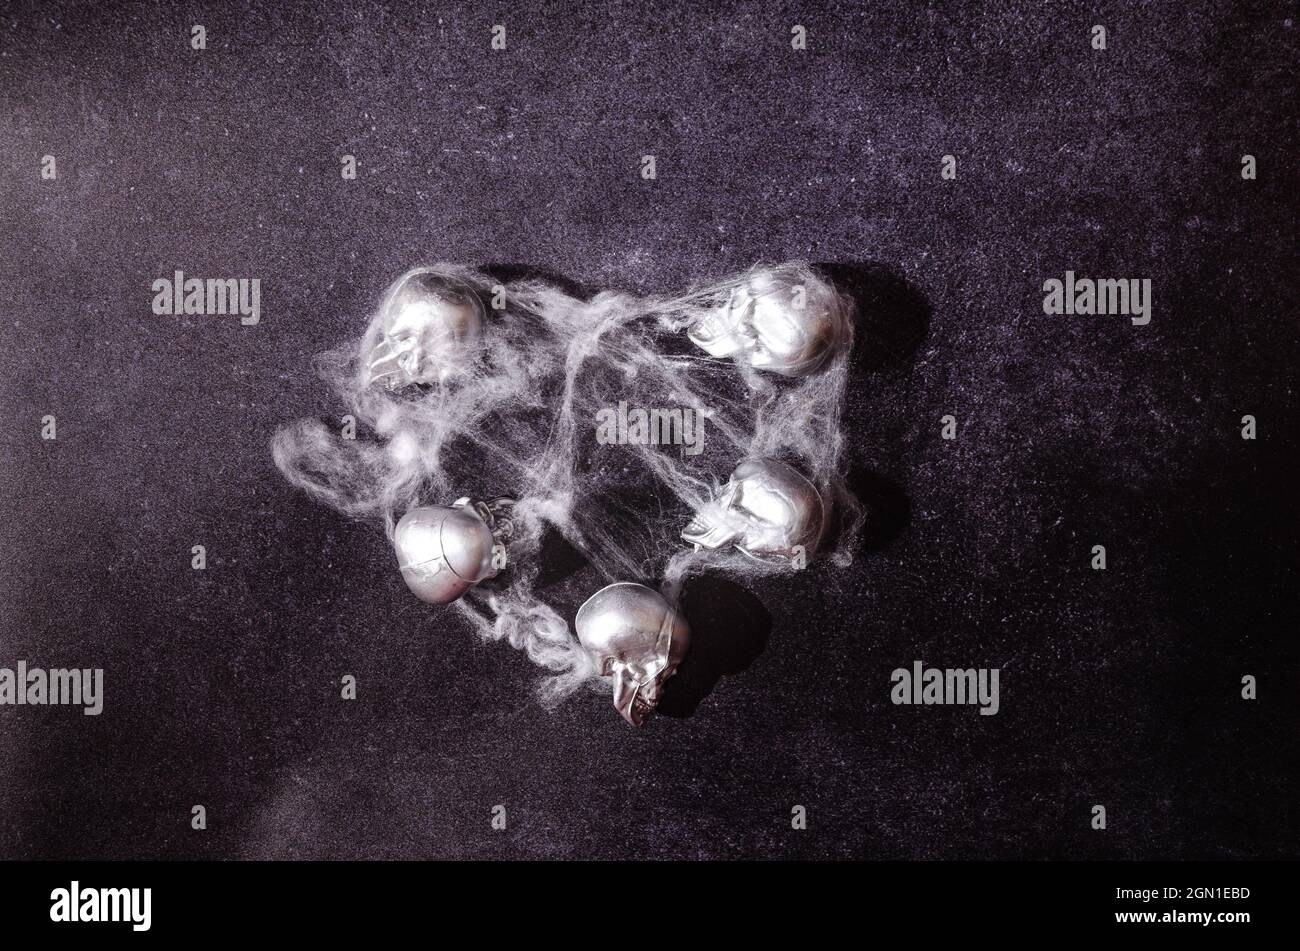 Five silver sculls lying on a dark background, covered with spider web. Halloween horror creative concept. Scary party artistic desing or invitation c Stock Photo